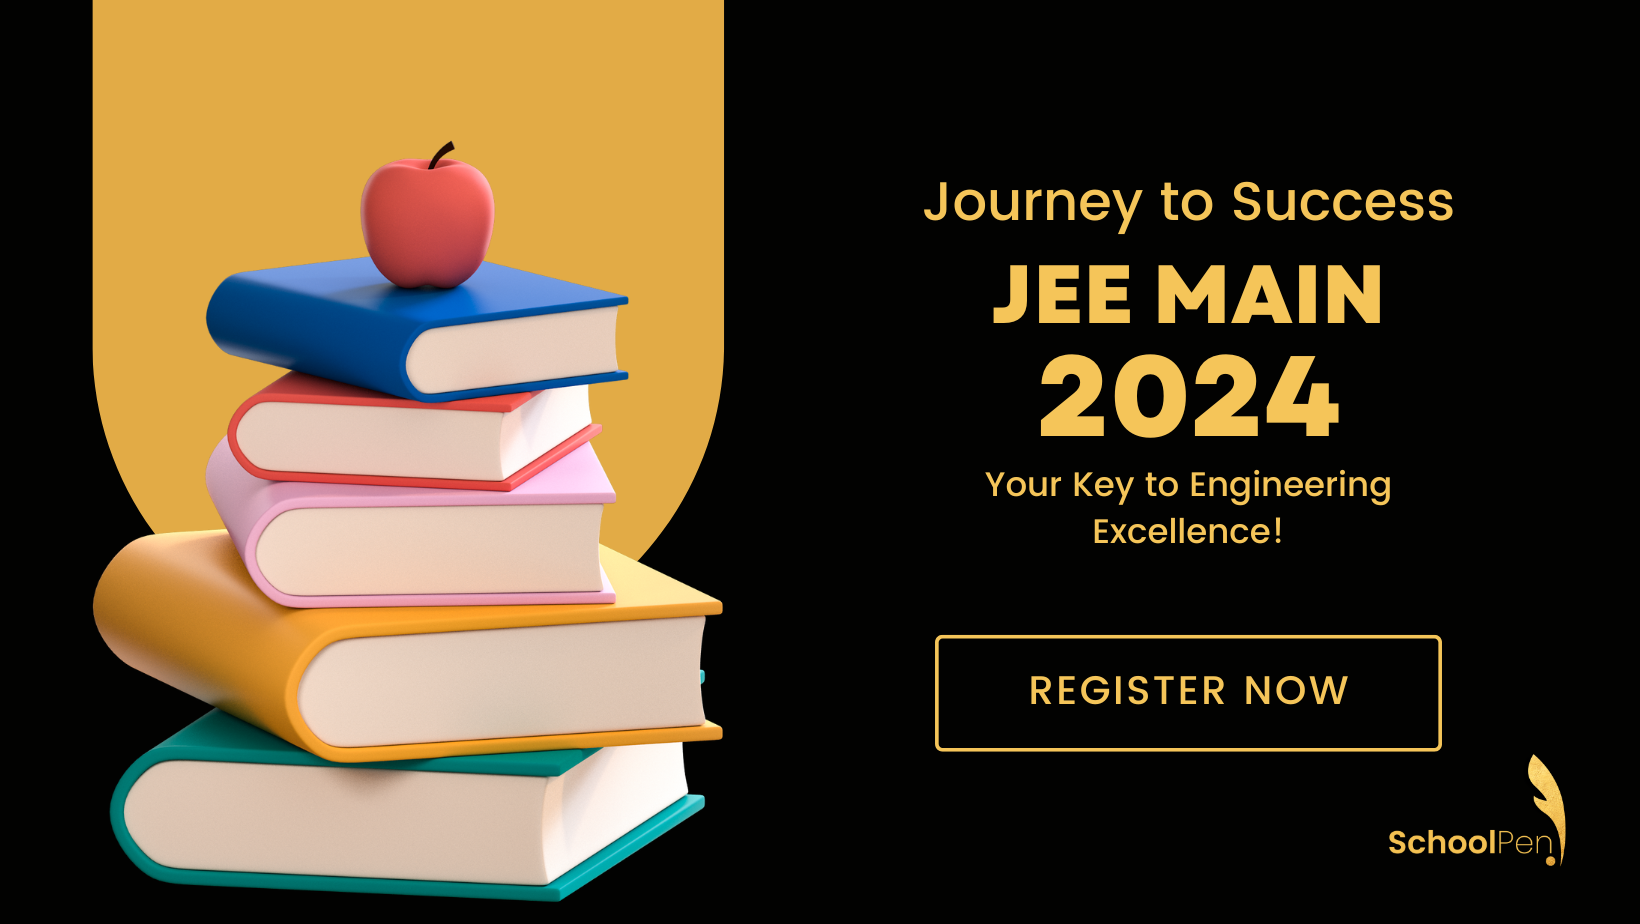 A Guide to JEE Main 2024